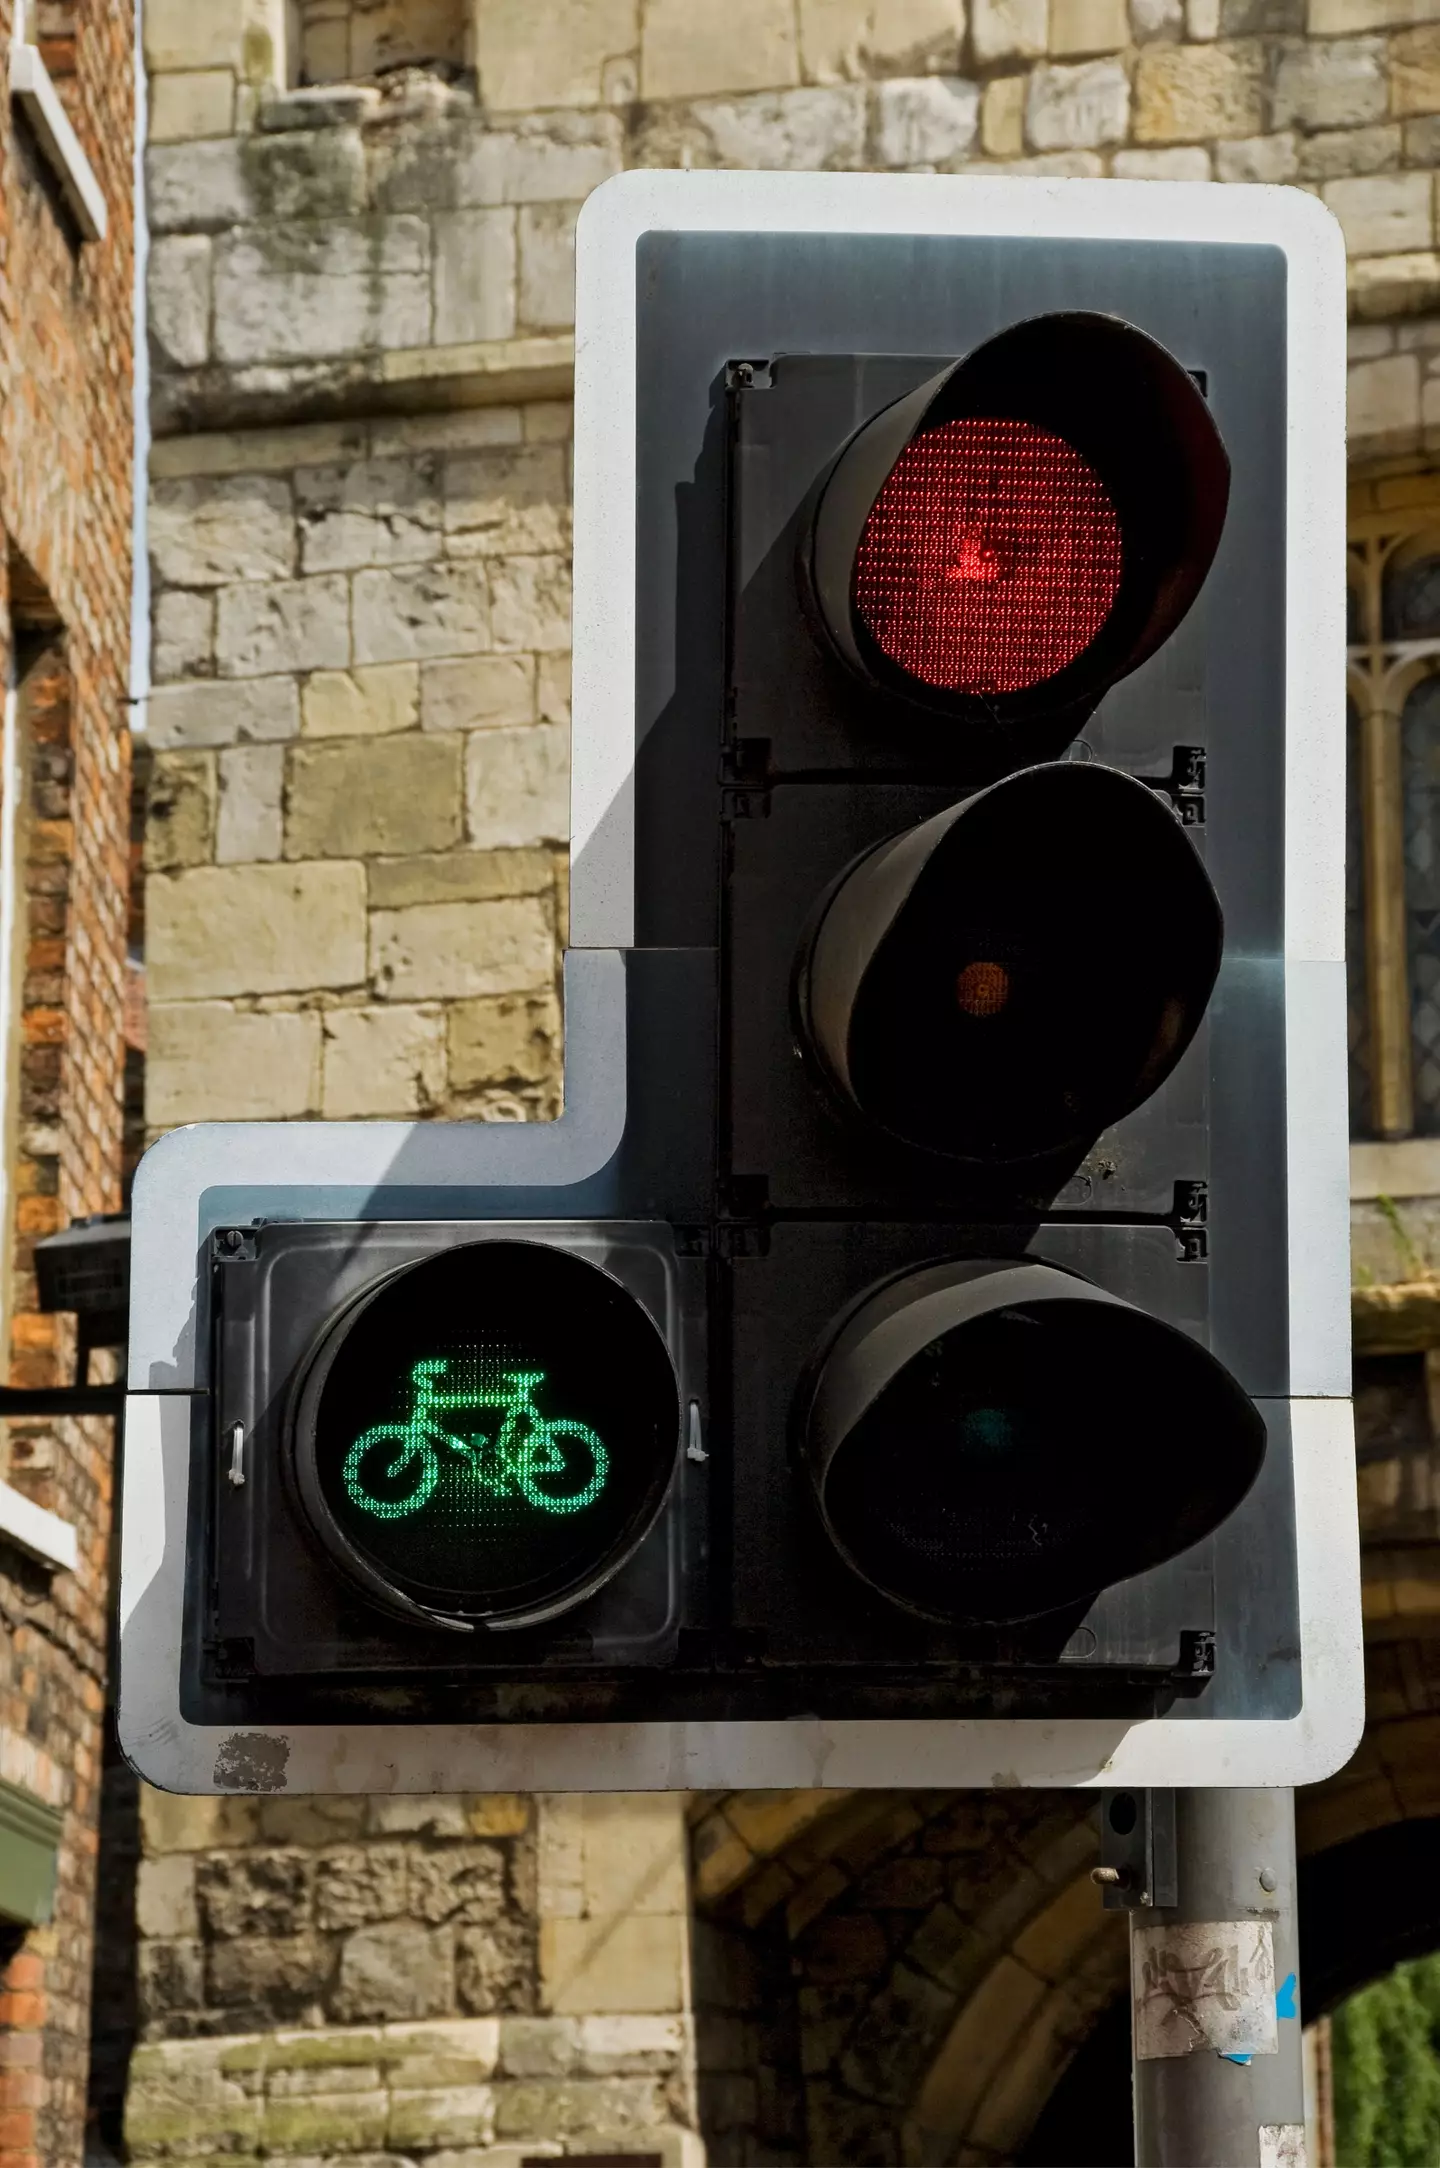 Cyclists should never run through red lights.